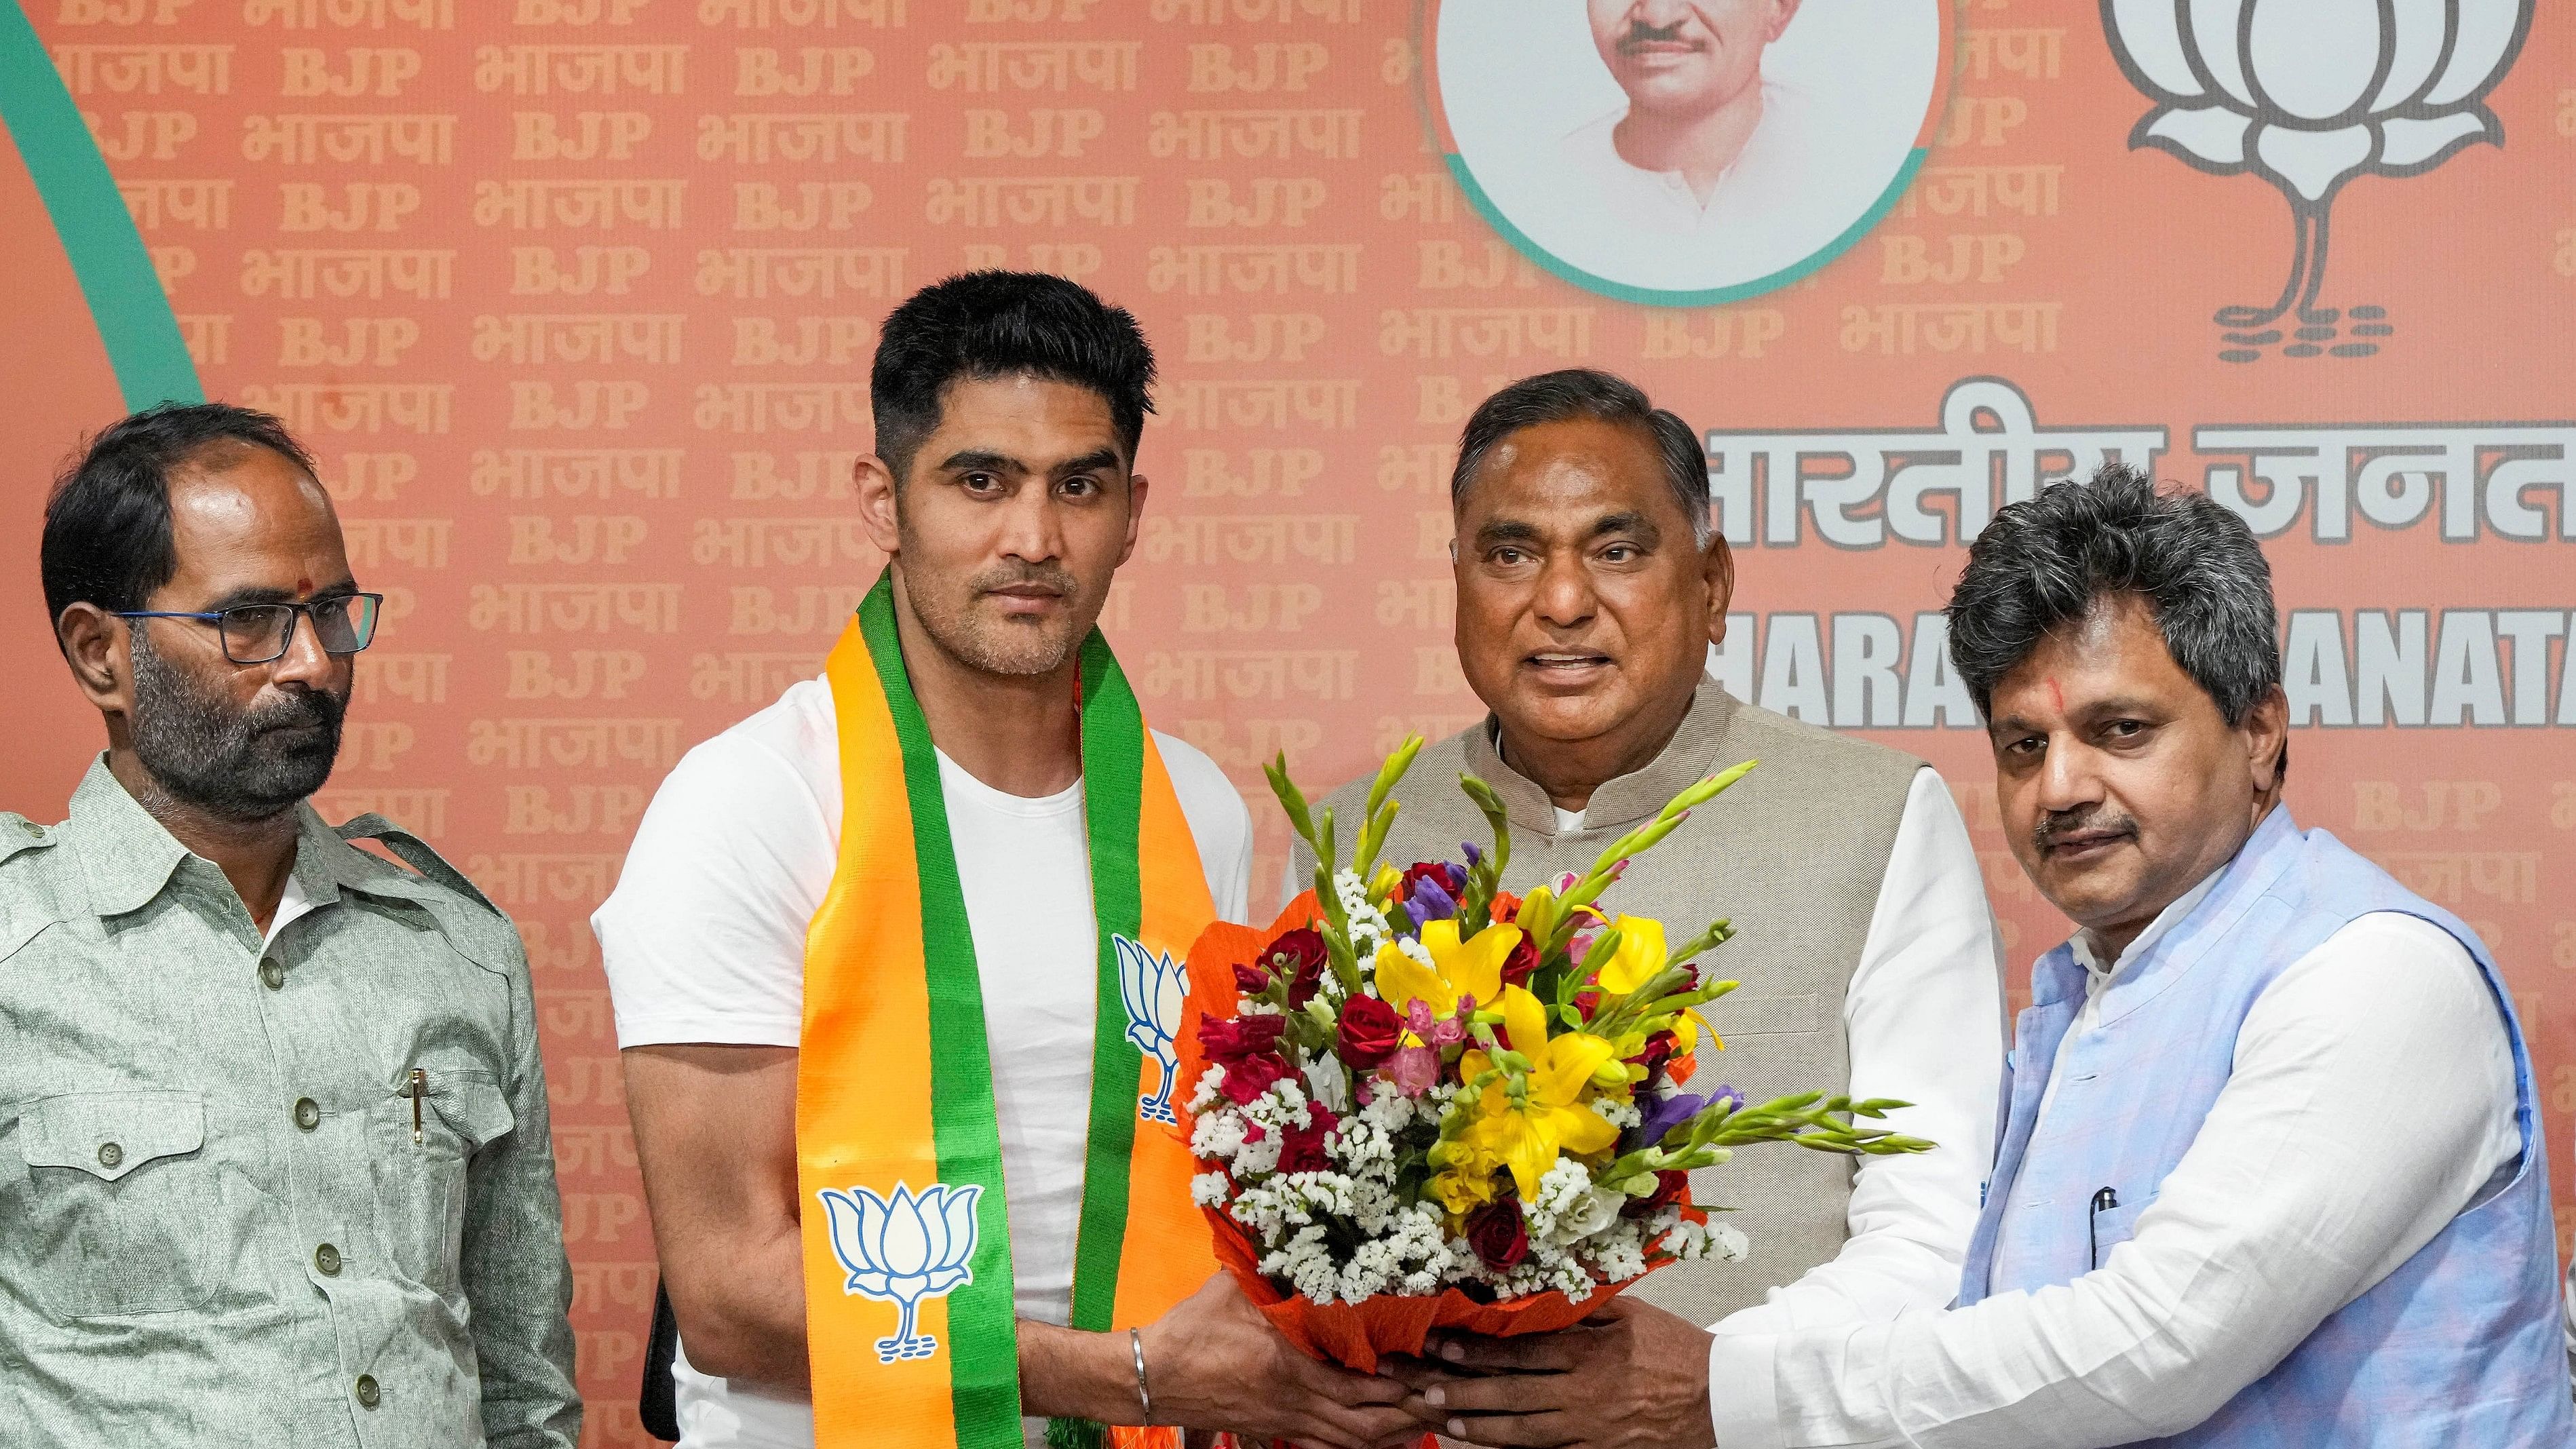 <div class="paragraphs"><p> Boxer and former Congress leader Vijender Singh being greeted by BJP leader Ramvir Singh Bidhuri as he joins the party ahead of Lok Sabha elections.</p></div>